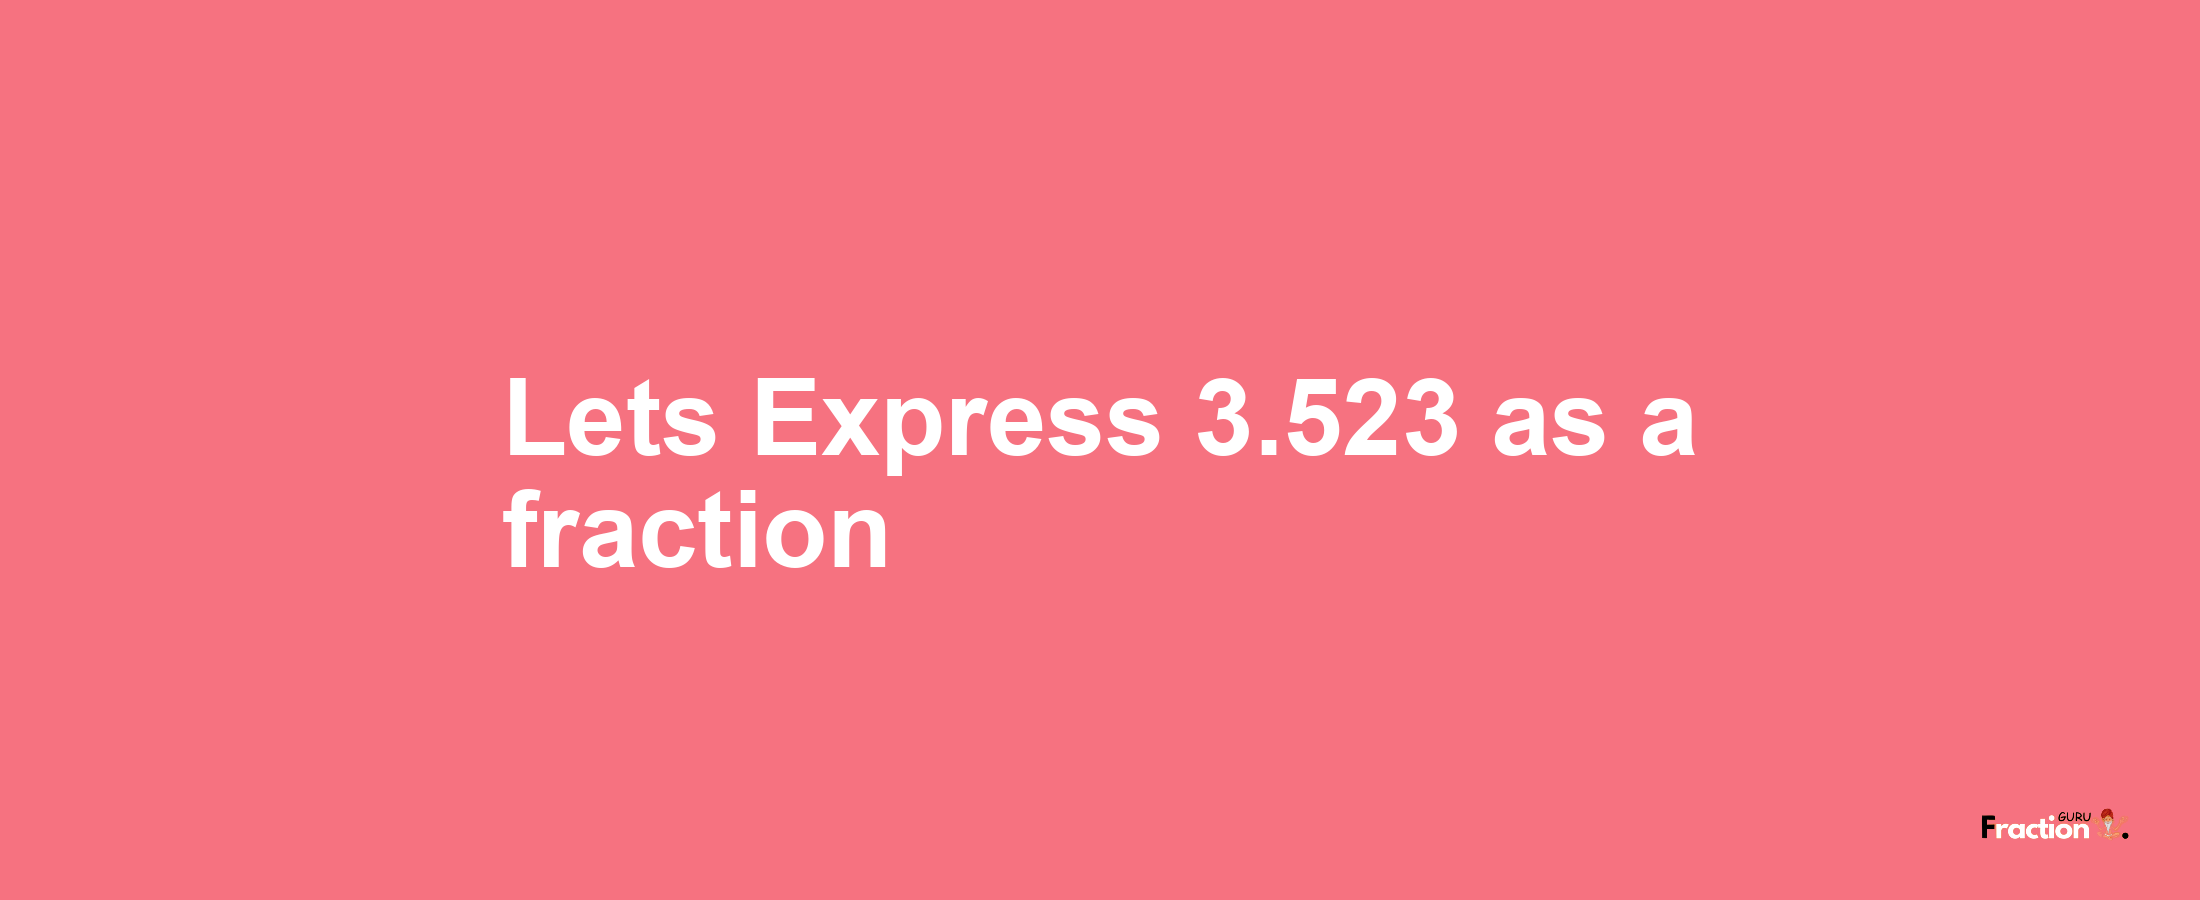 Lets Express 3.523 as afraction